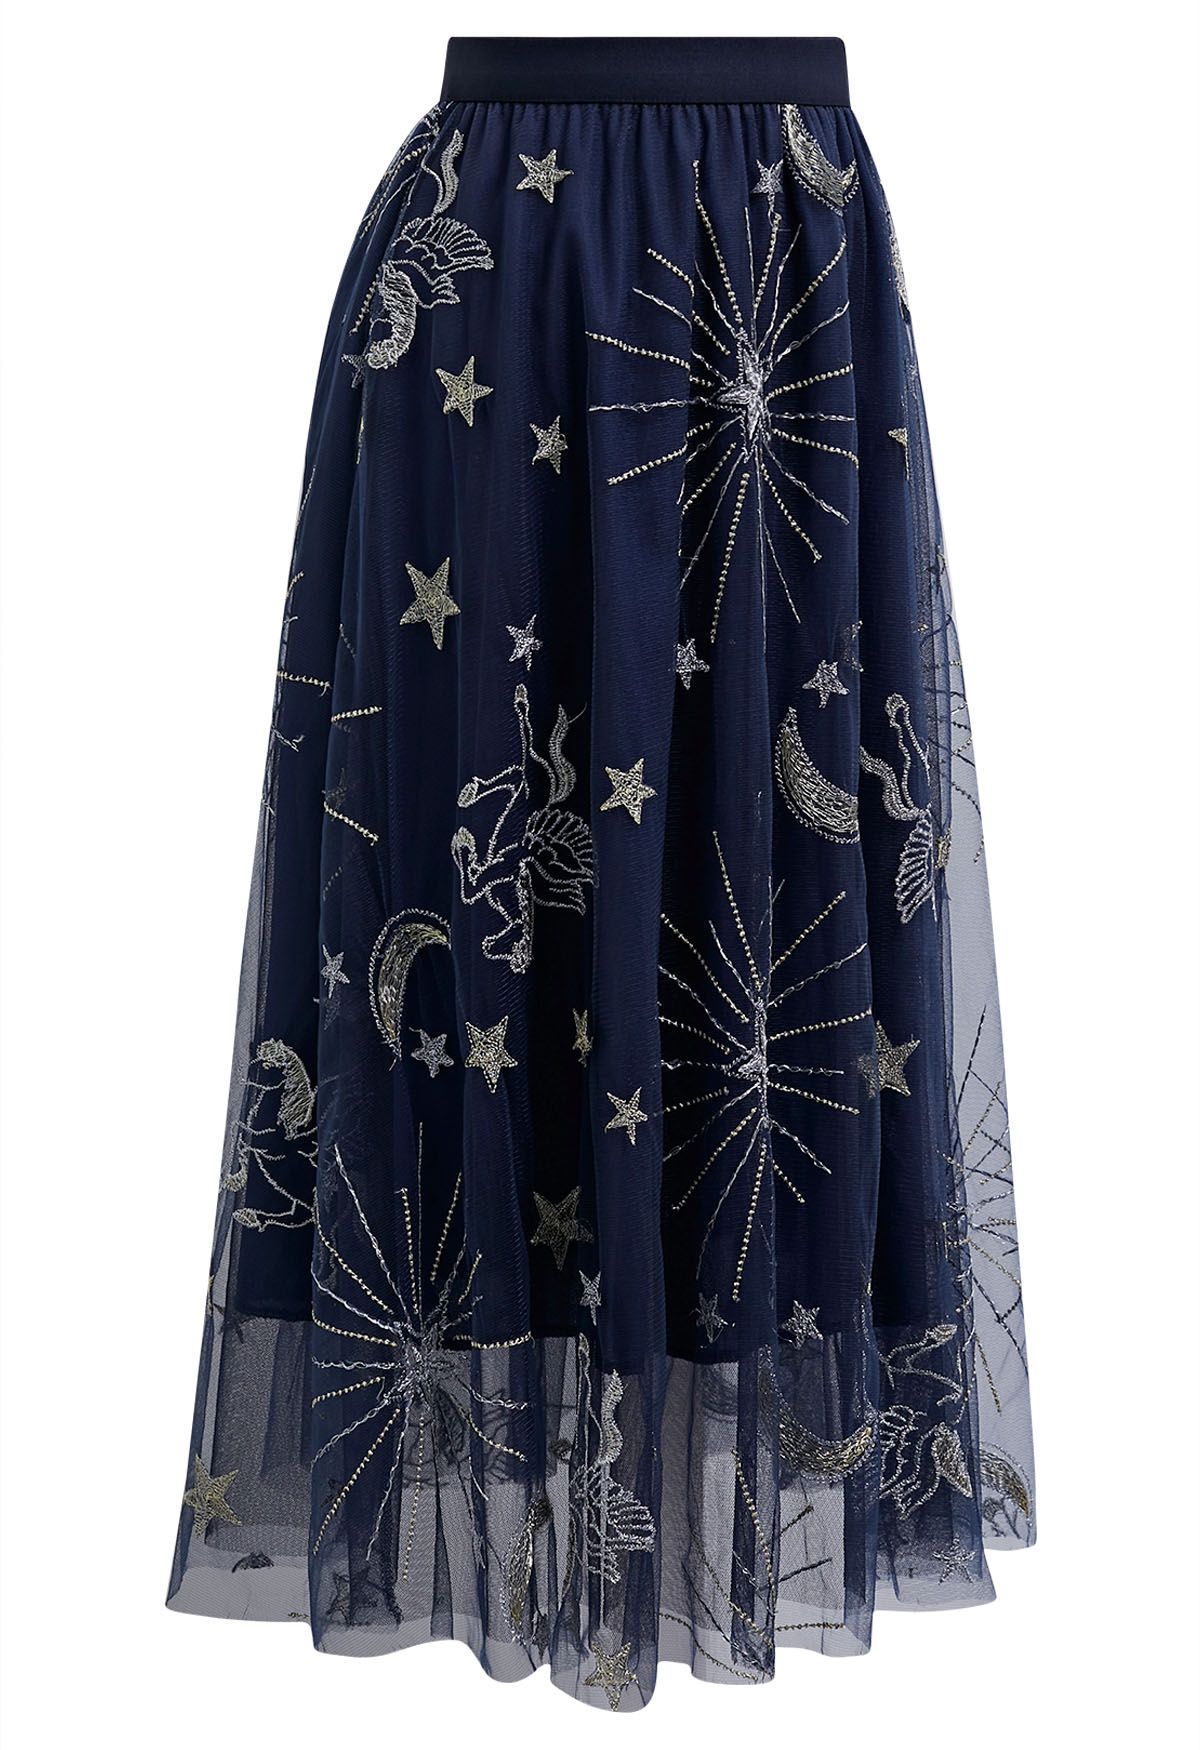 Mysterious Night Moon and Star Embroidered Mesh Tulle Skirt in Navy ...